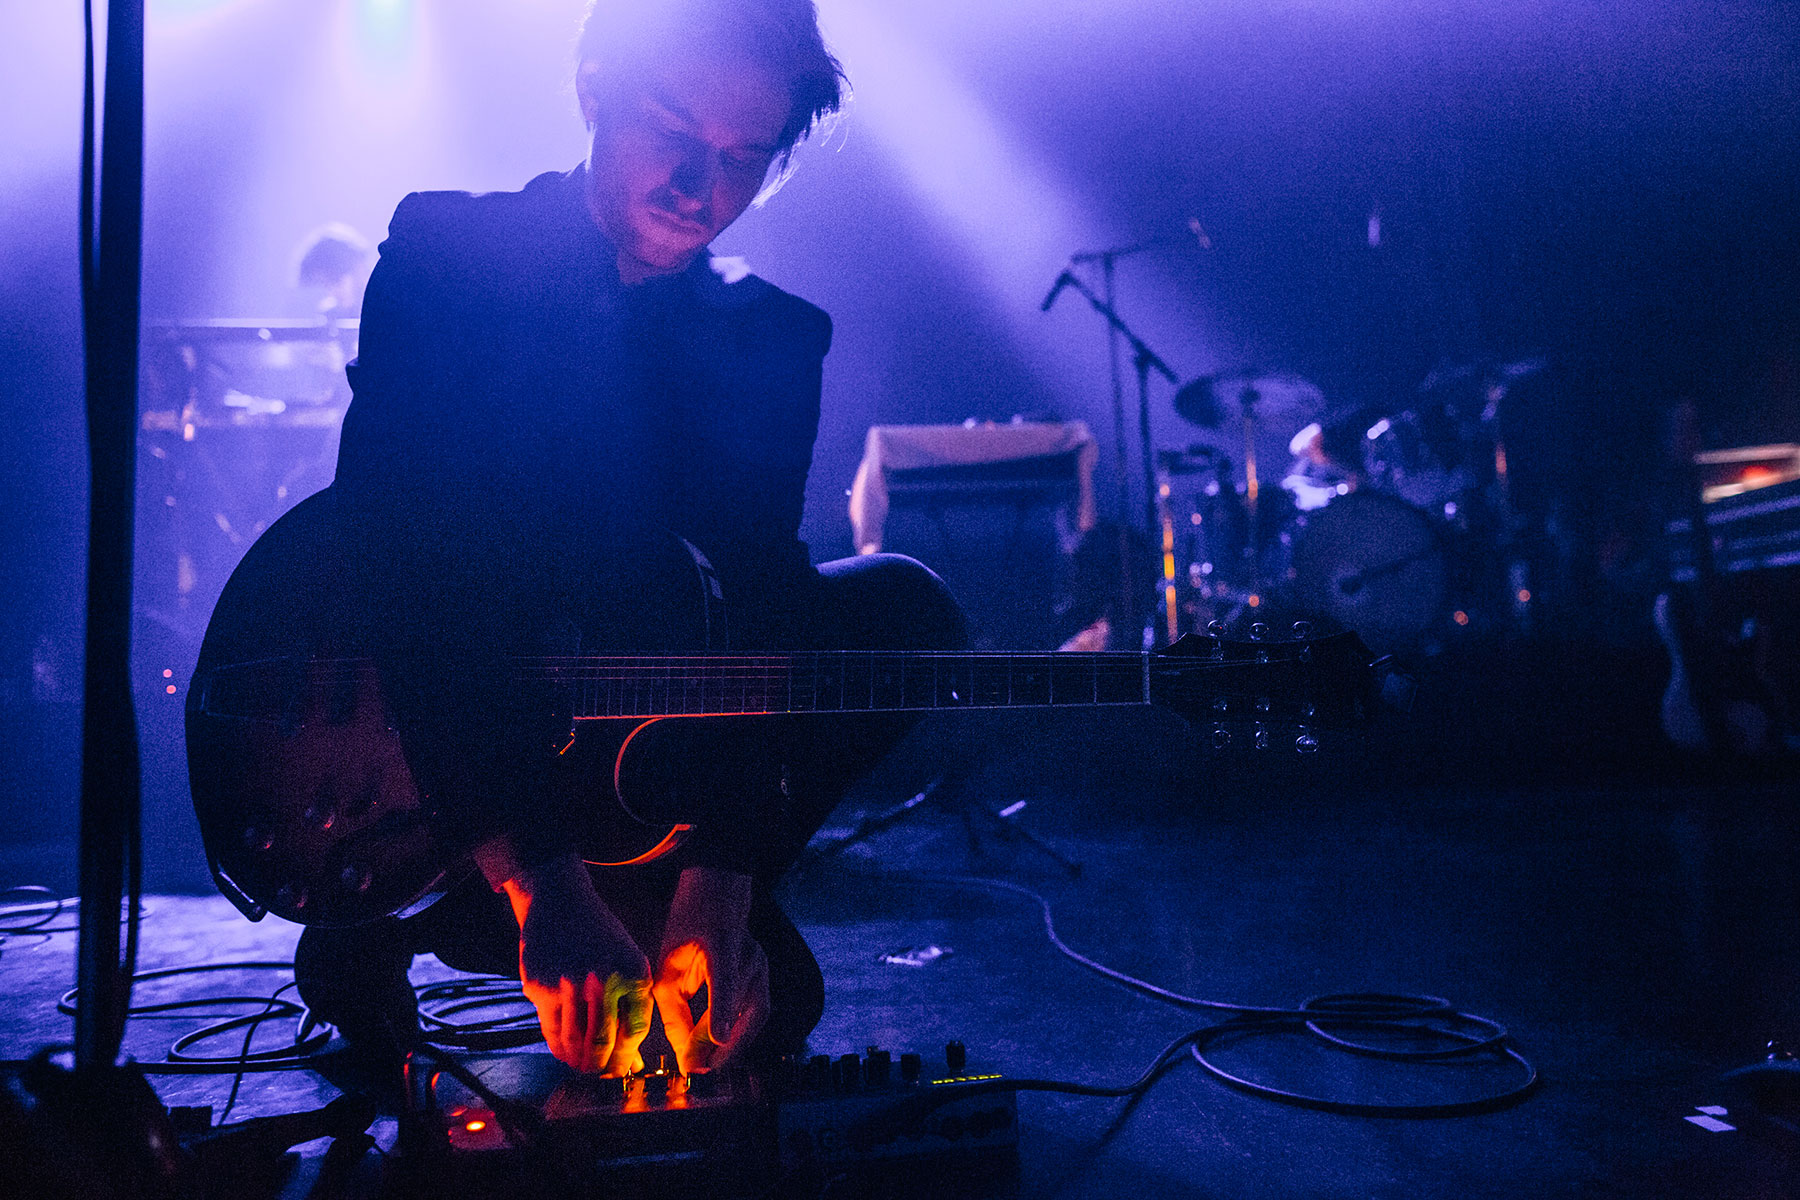 Picture from FROST festival 2013. Efterklang playing live at Vega, supported by swedish Anna von Hausswolff